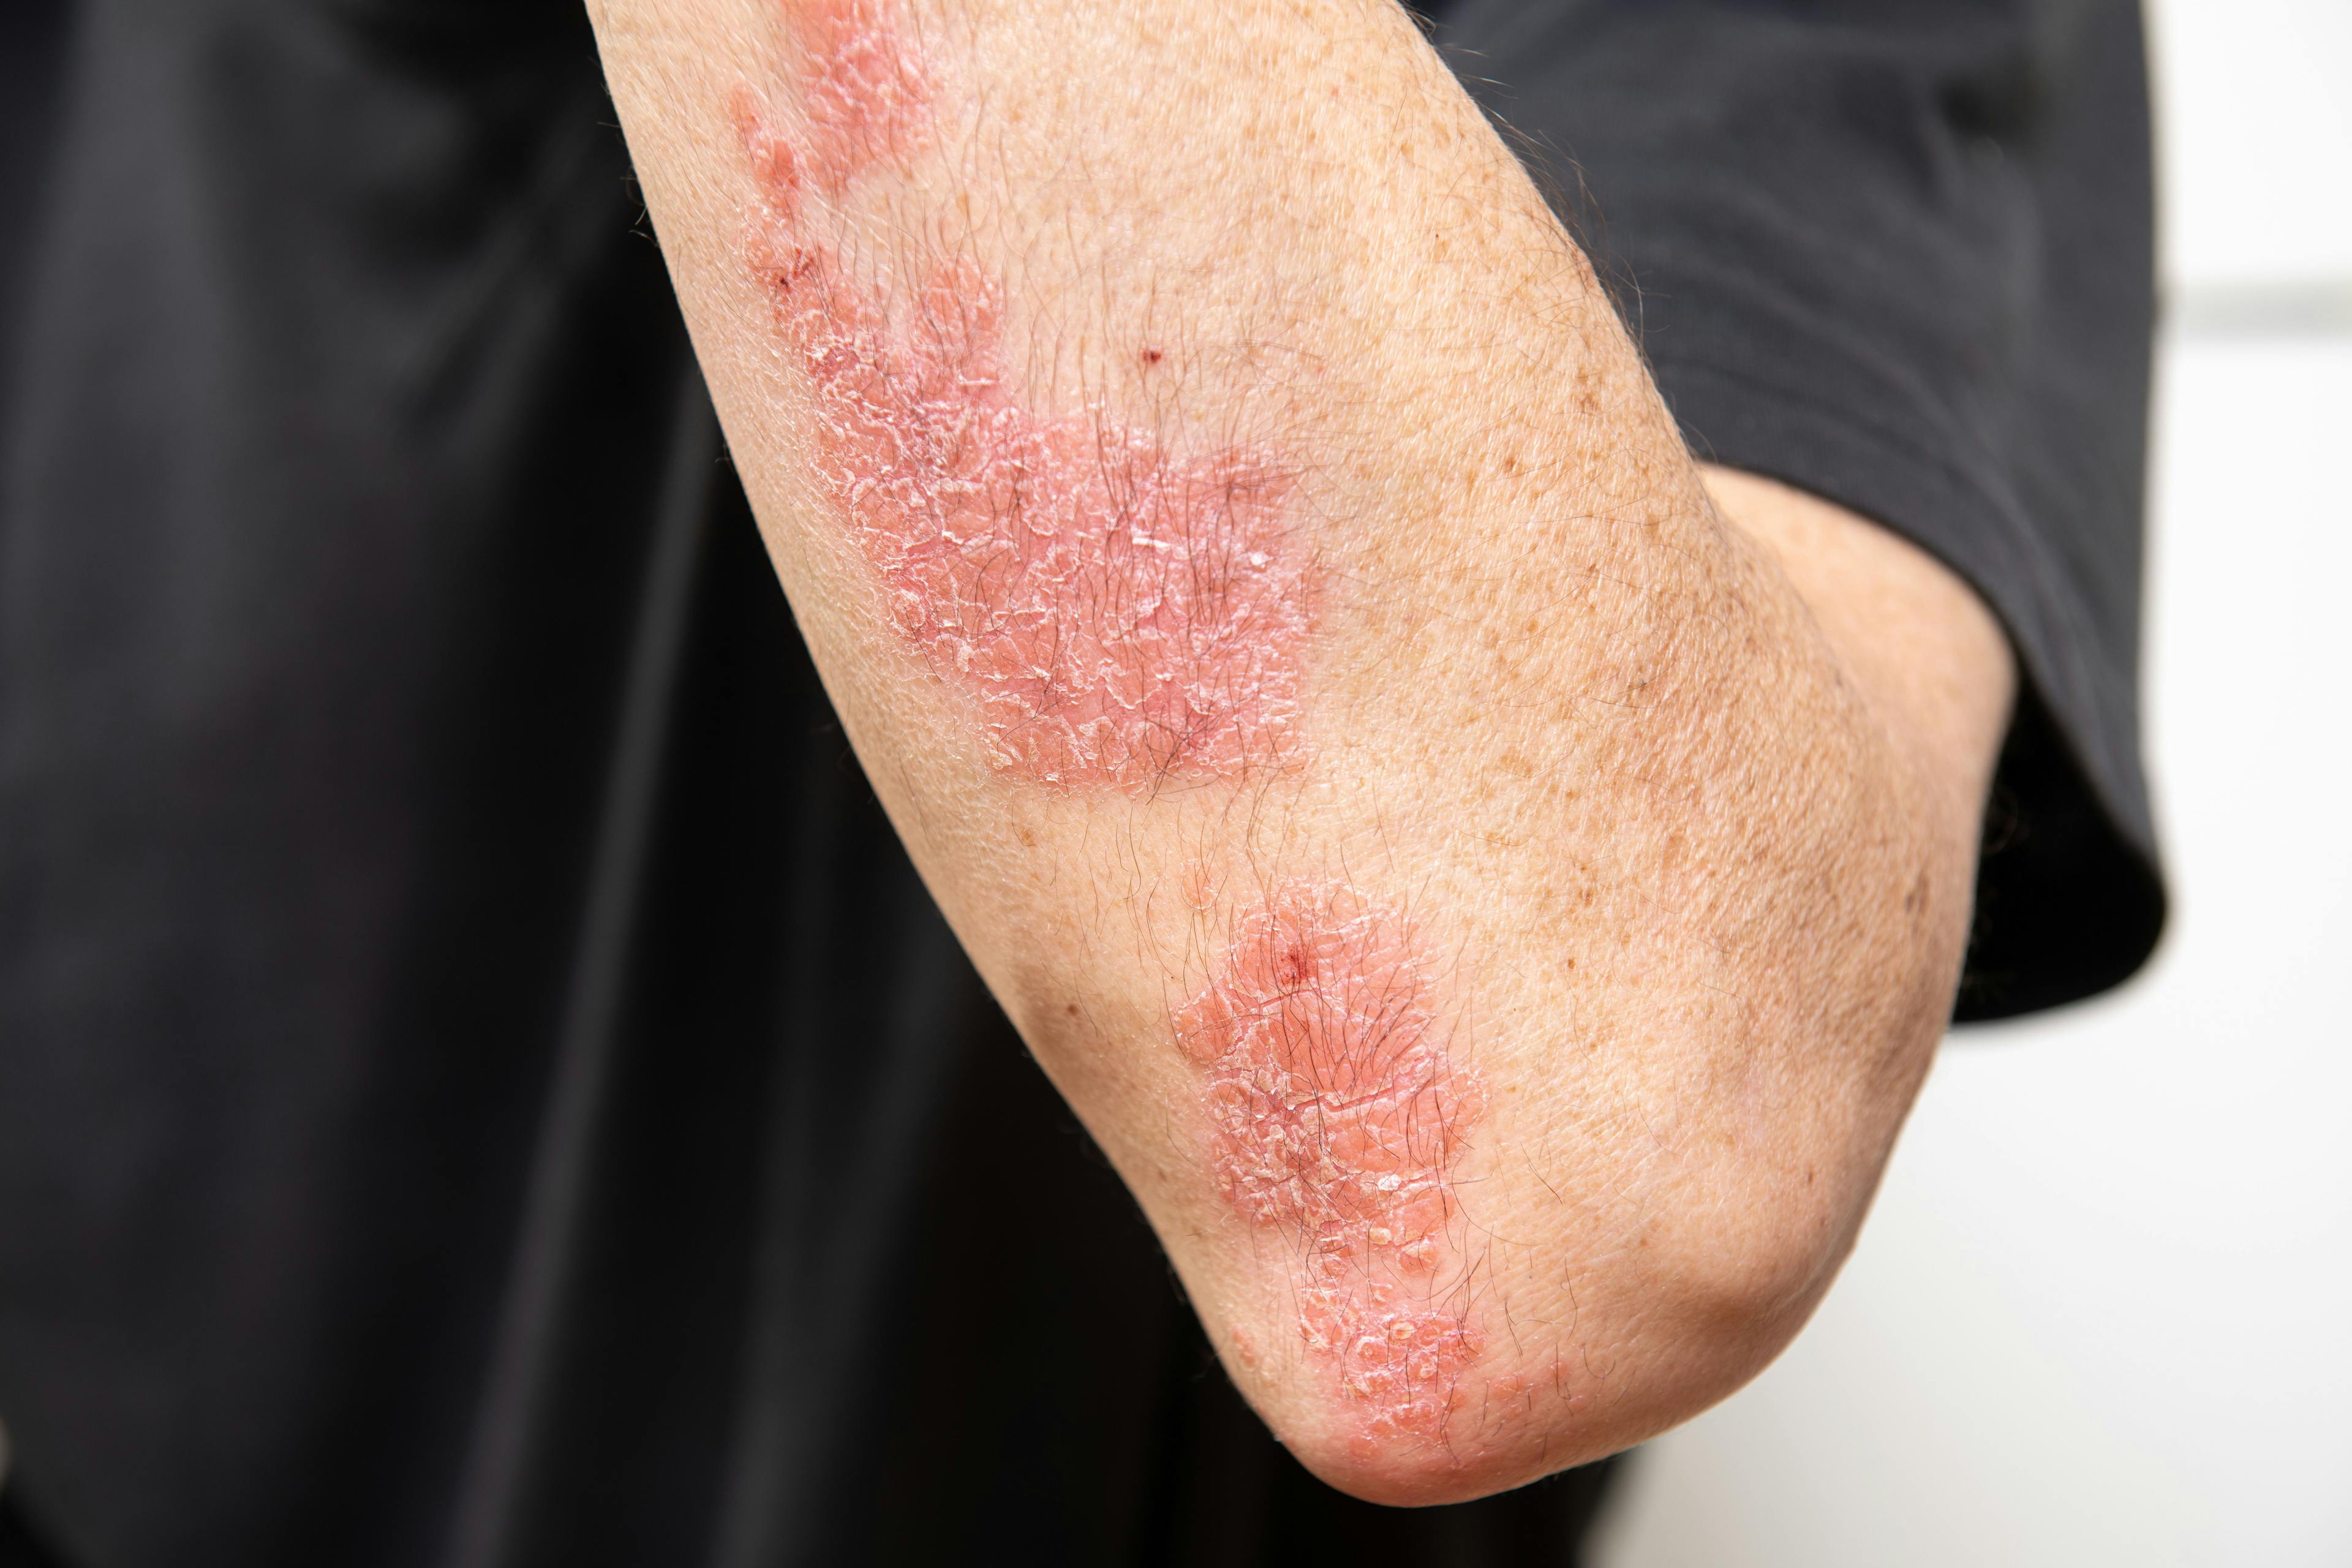 Generalized Pustular Psoriasis Education Initiative Will Improve Care for Patients